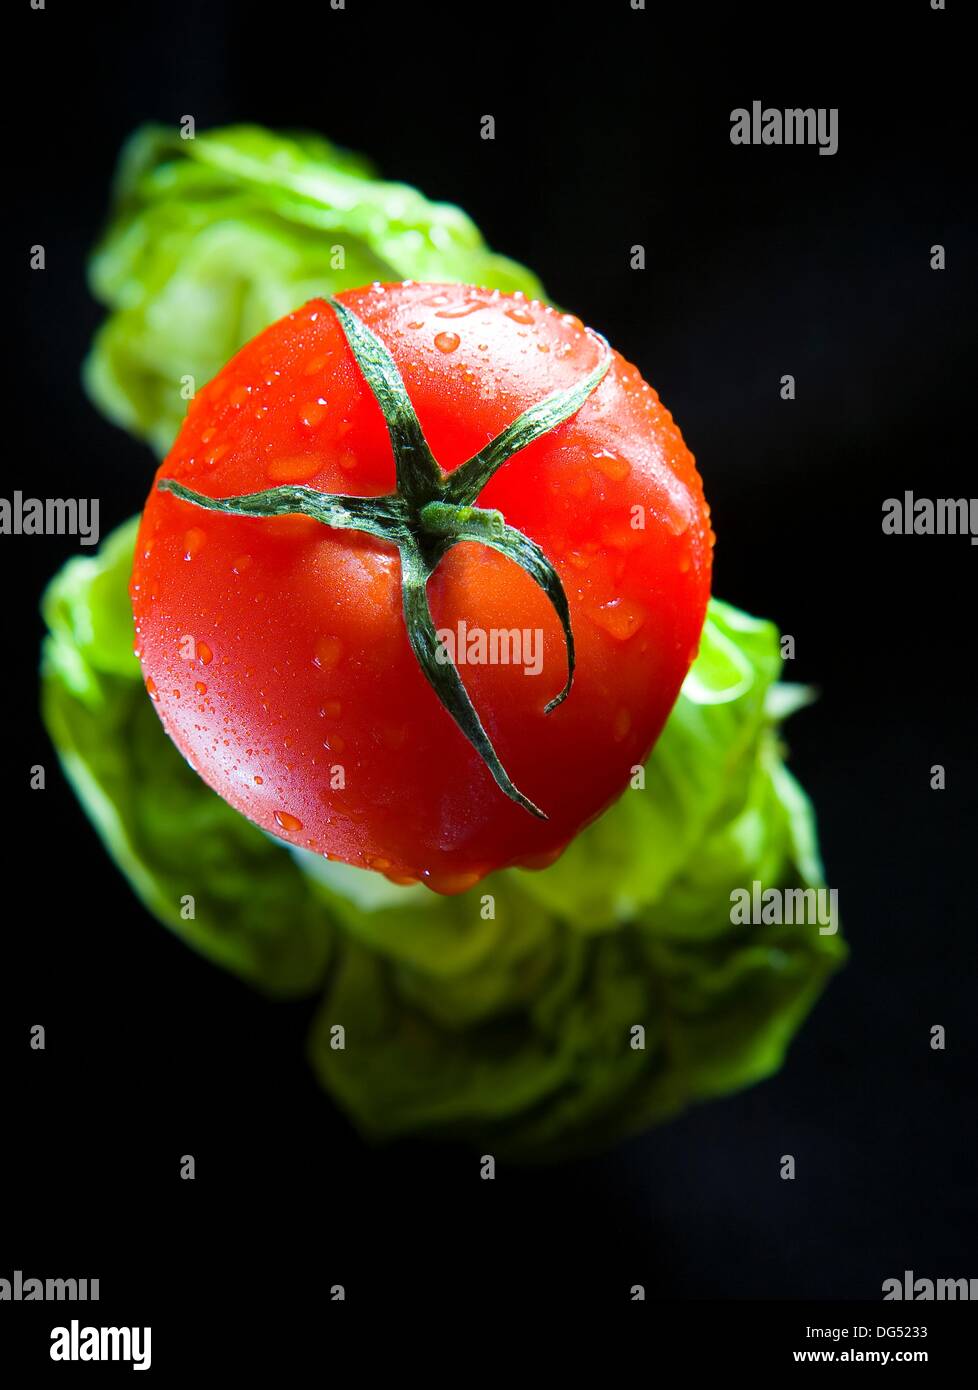 Vine ripened tomato floating in the air with lettuce leaf Stock Photo -  Alamy